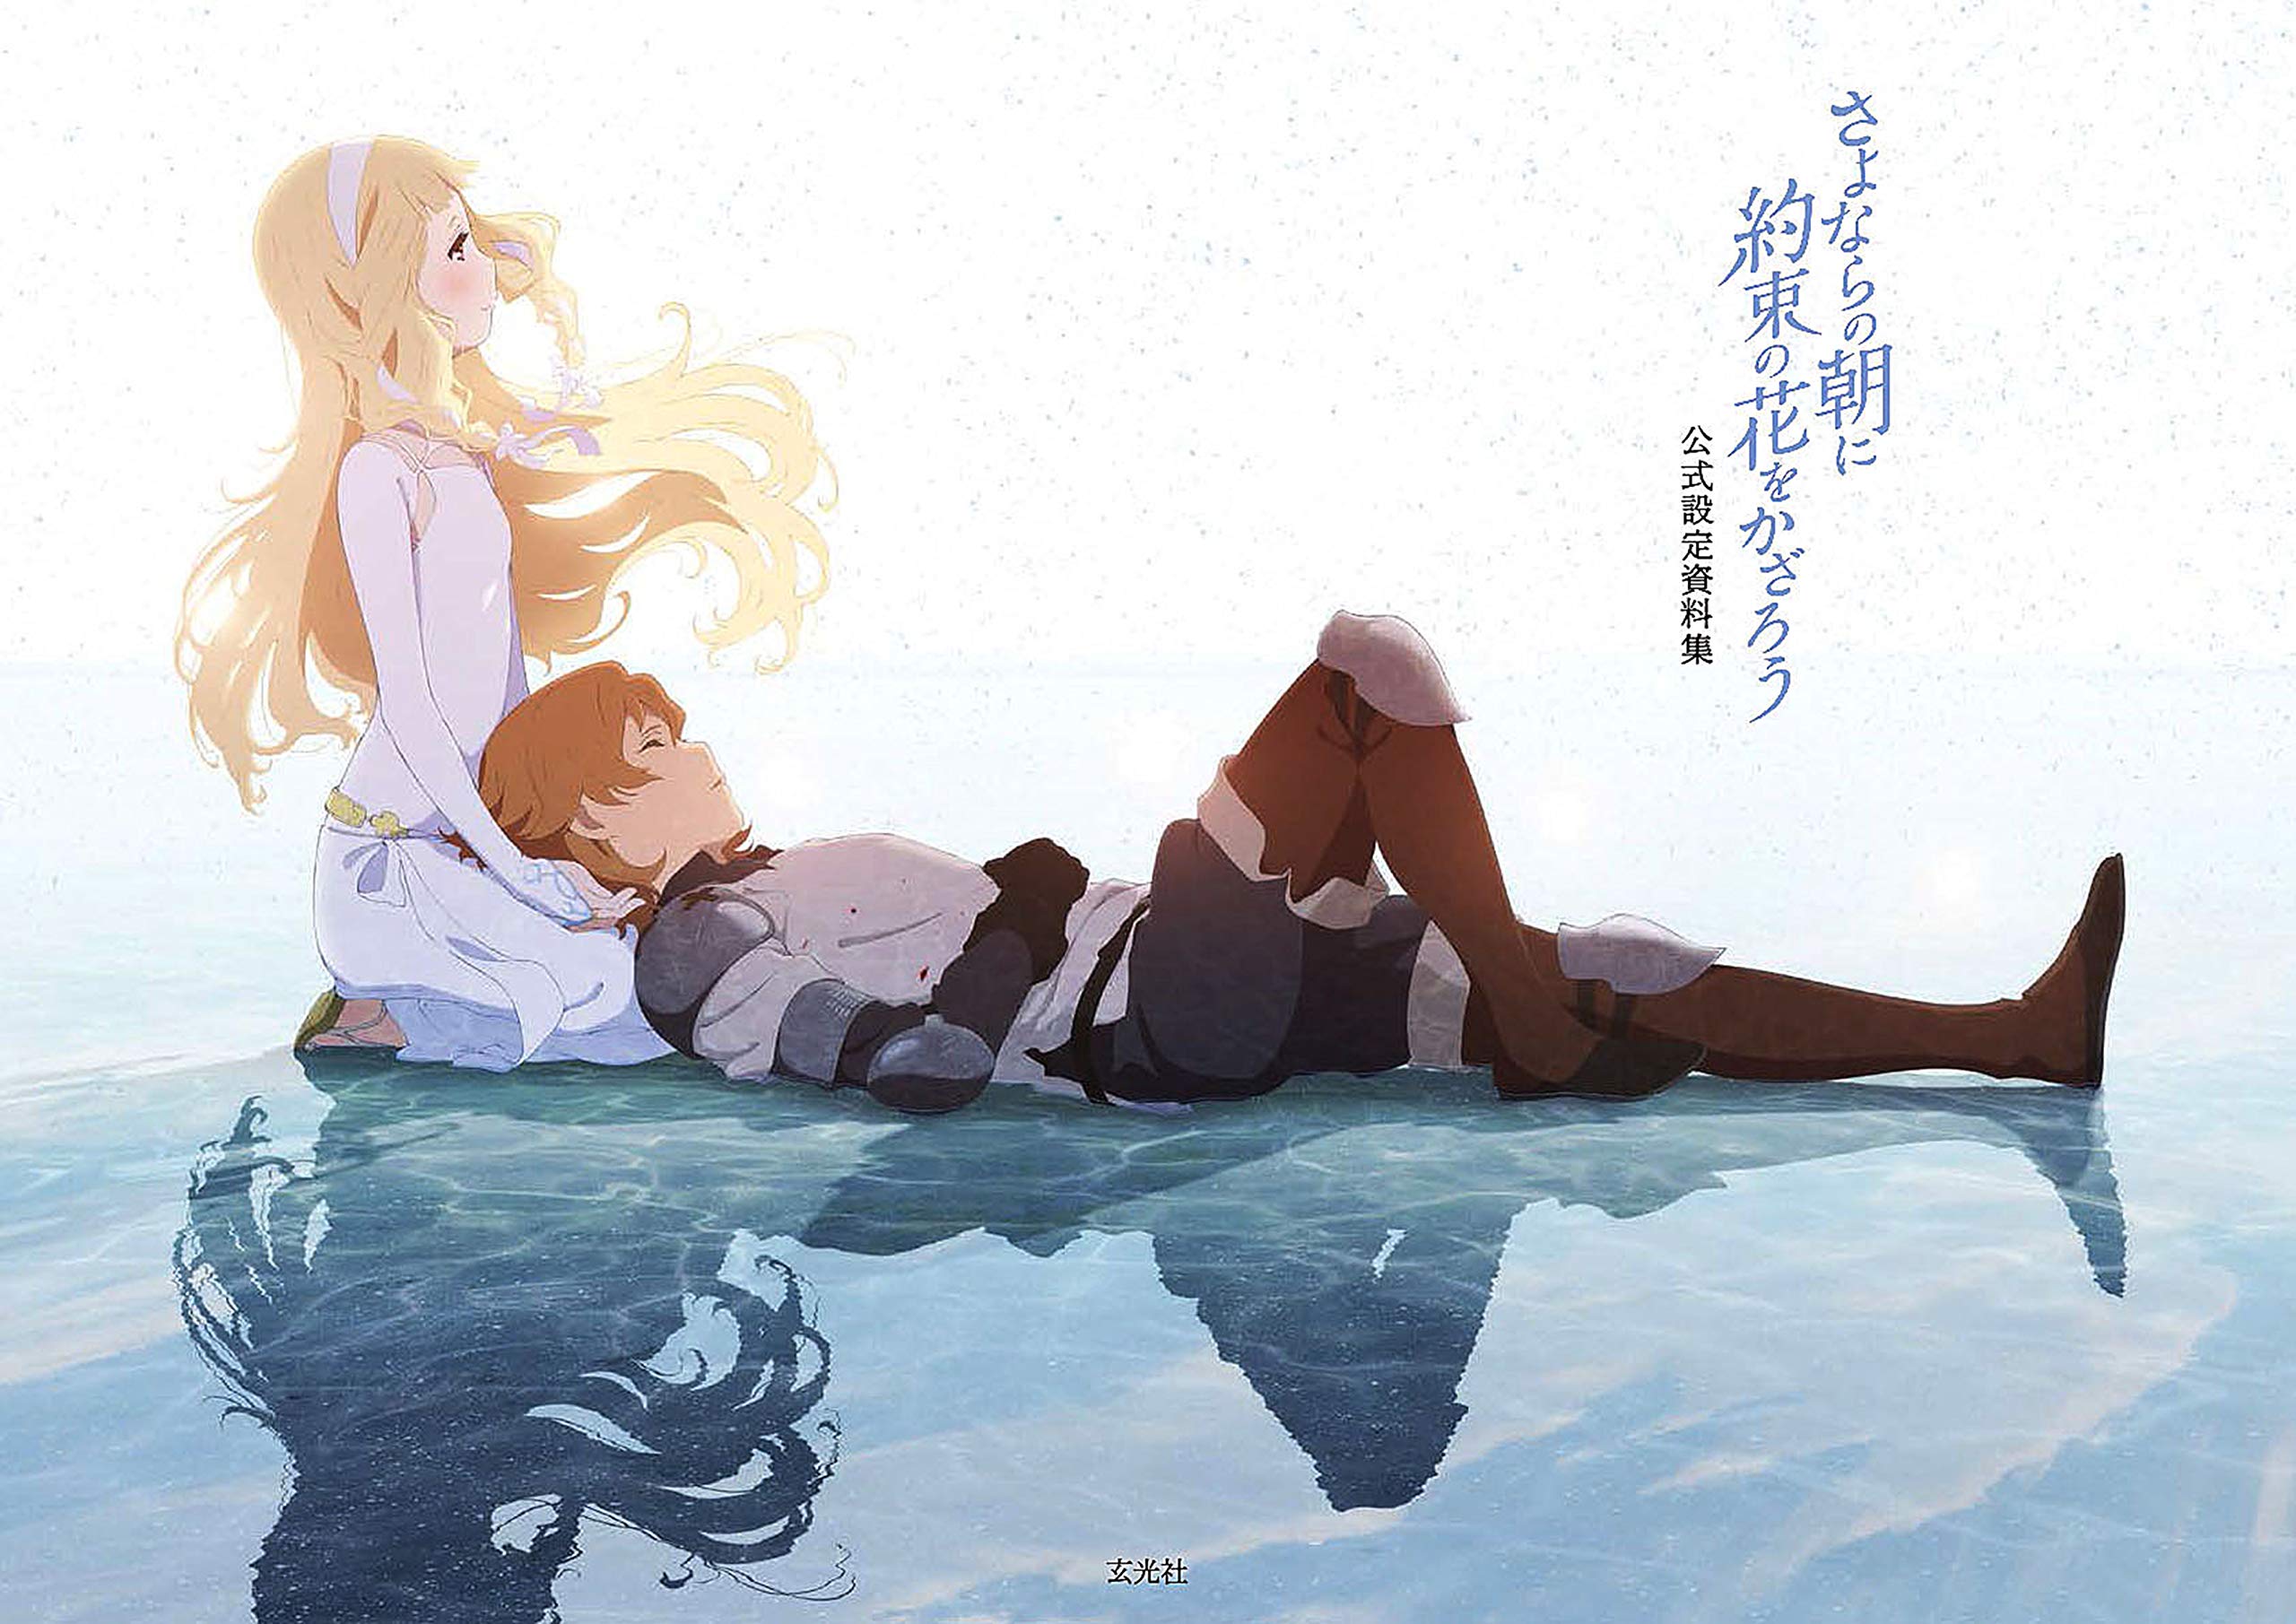 Maquia: When the Promised Flower Blooms Design and Rough Sketches Collection (Japanese Edition)